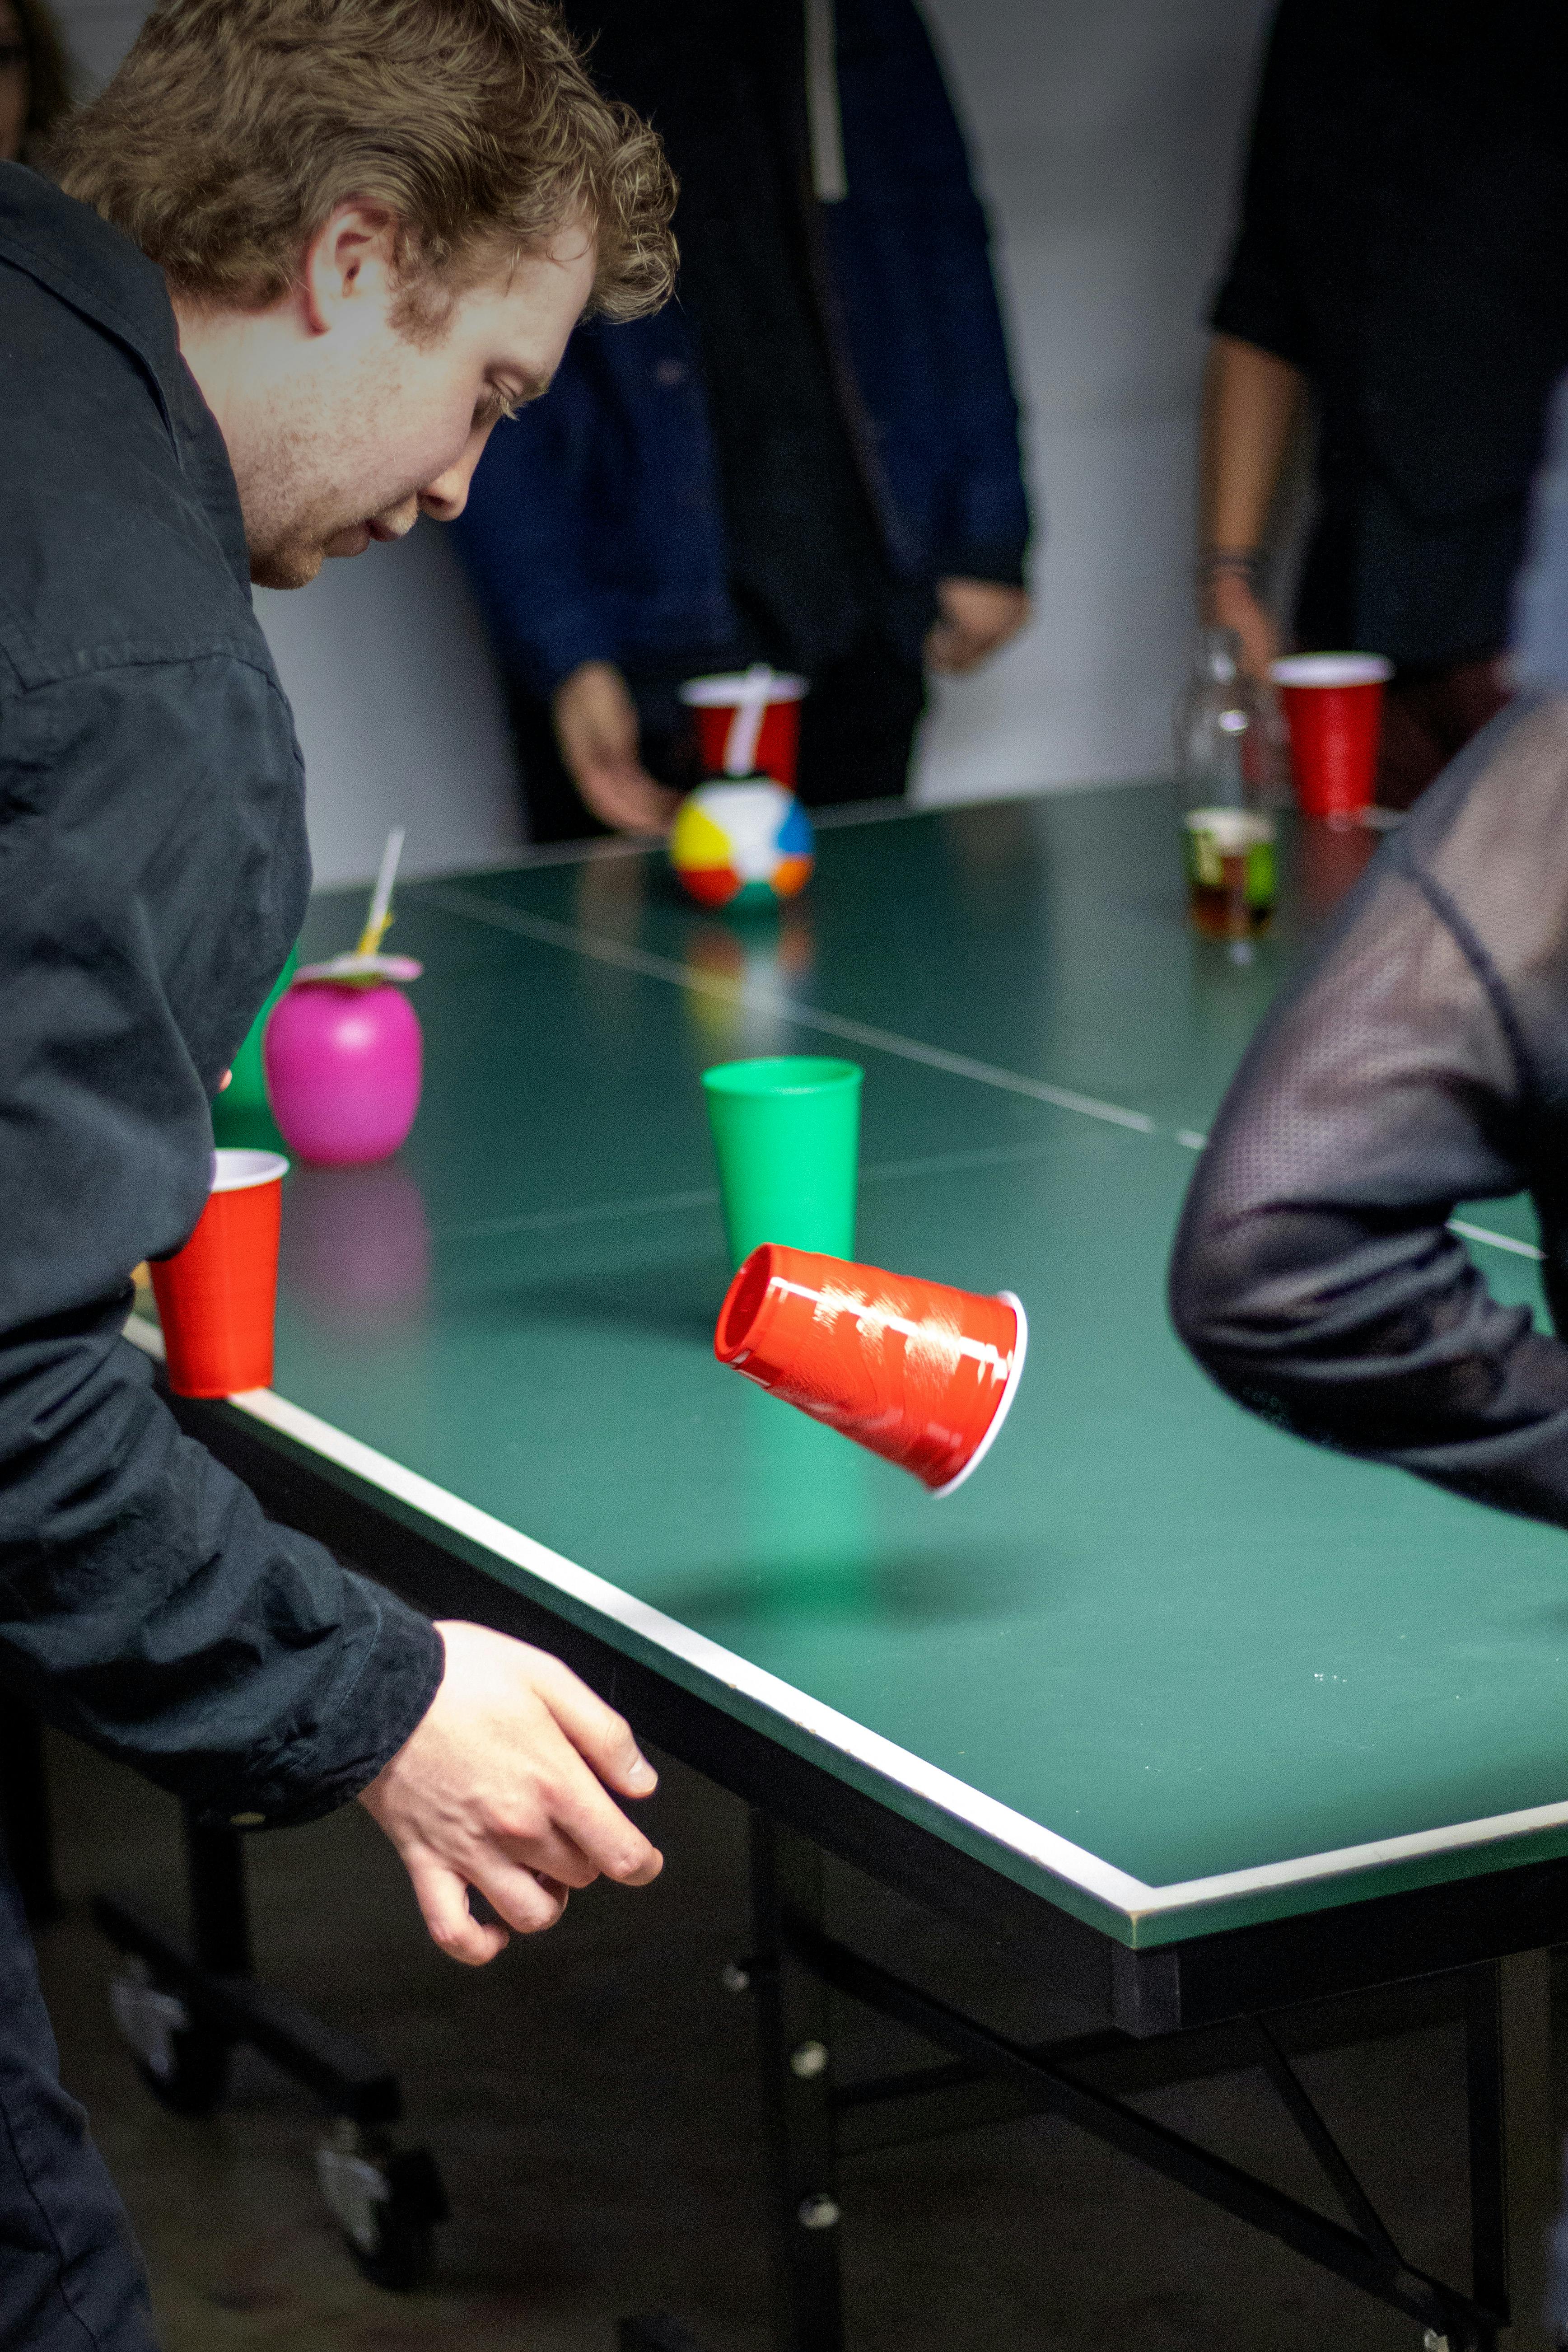 man playing games using a red cup